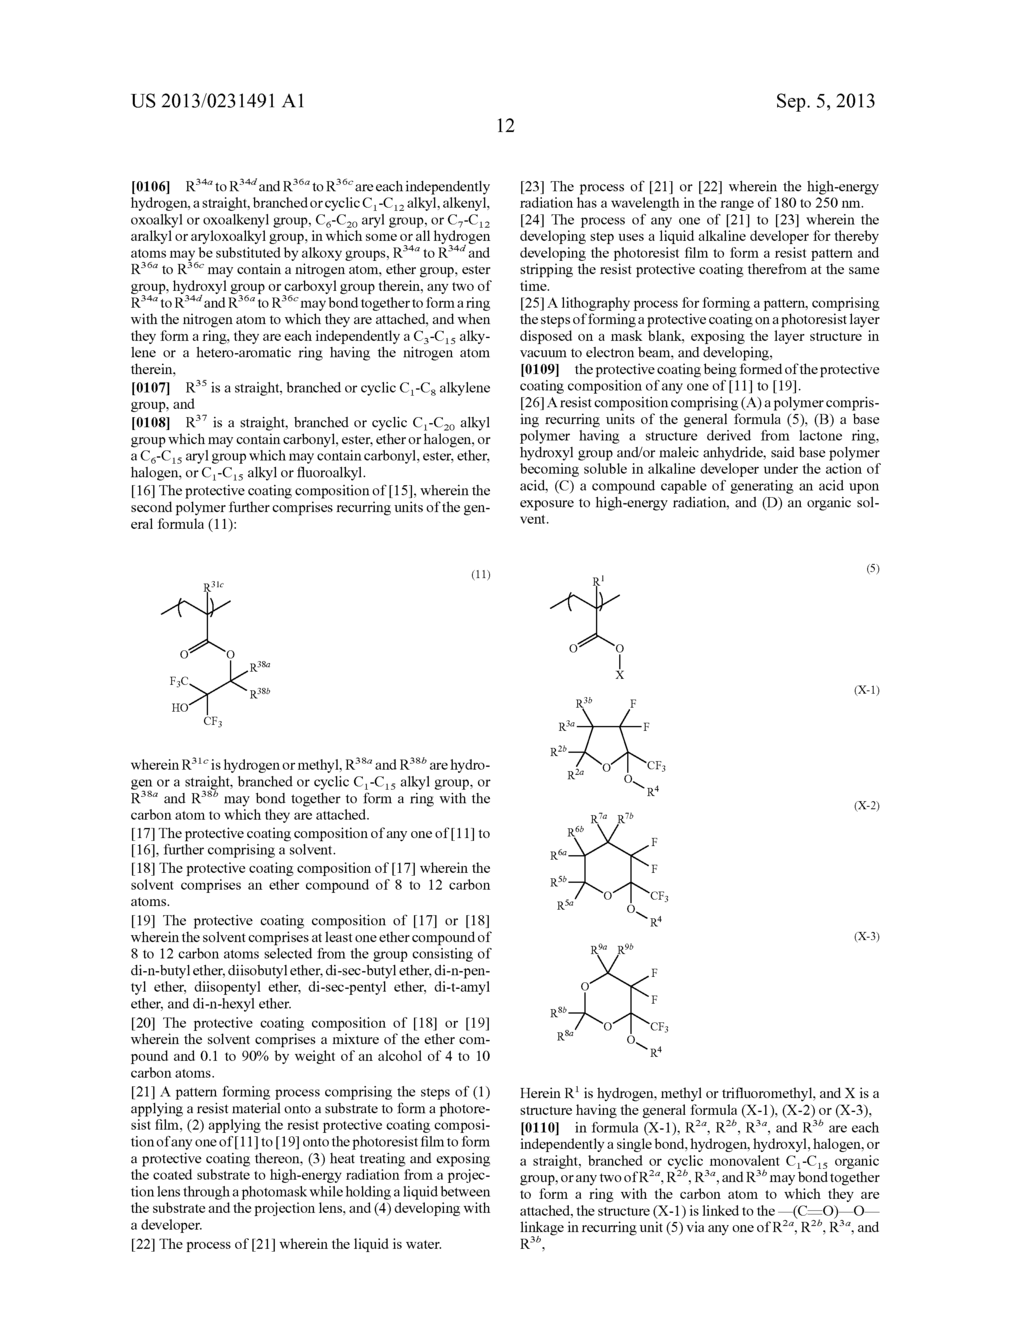 FLUORINATED MONOMER OF CYCLIC ACETAL STRUCTURE, POLYMER, RESIST PROTECTIVE     COATING COMPOSITION, RESIST COMPOSITION, AND PATTERNING PROCESS - diagram, schematic, and image 13